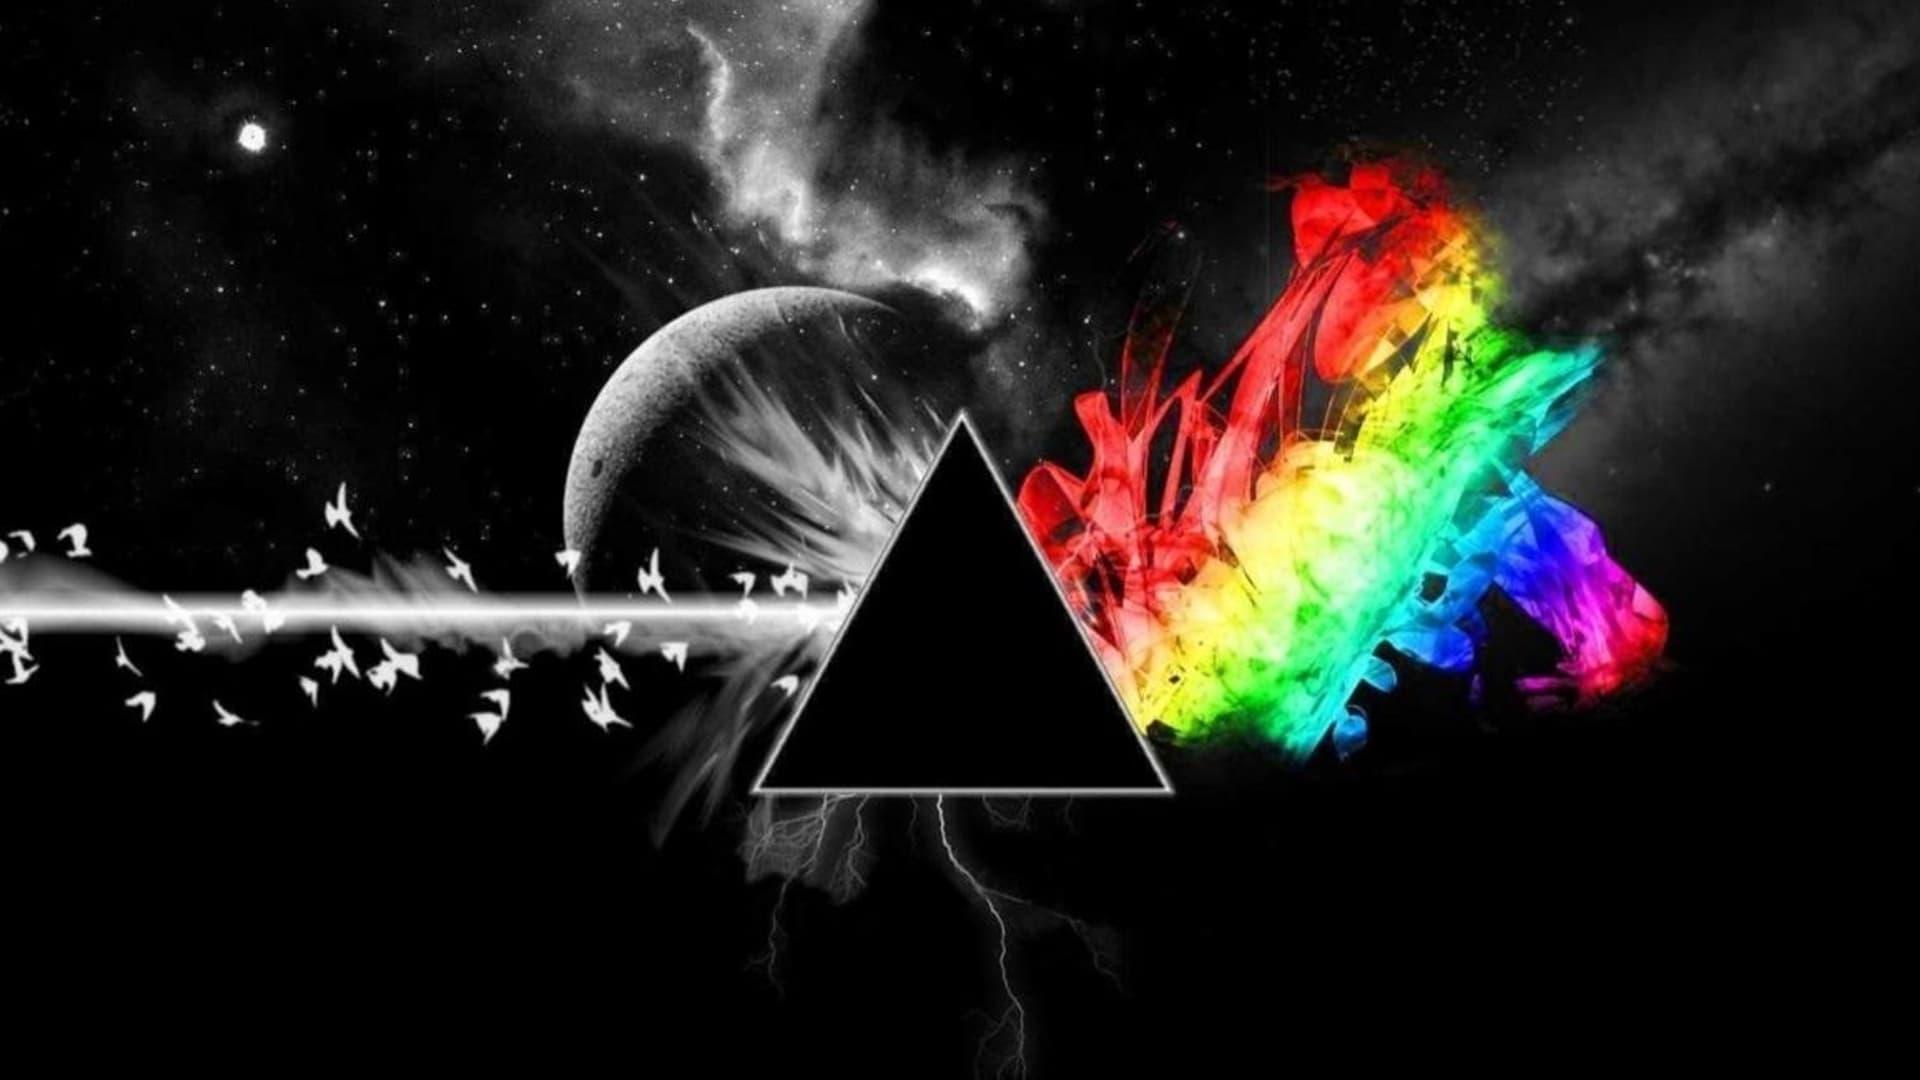 Dream Theater: Dark Side Of The Moon backdrop